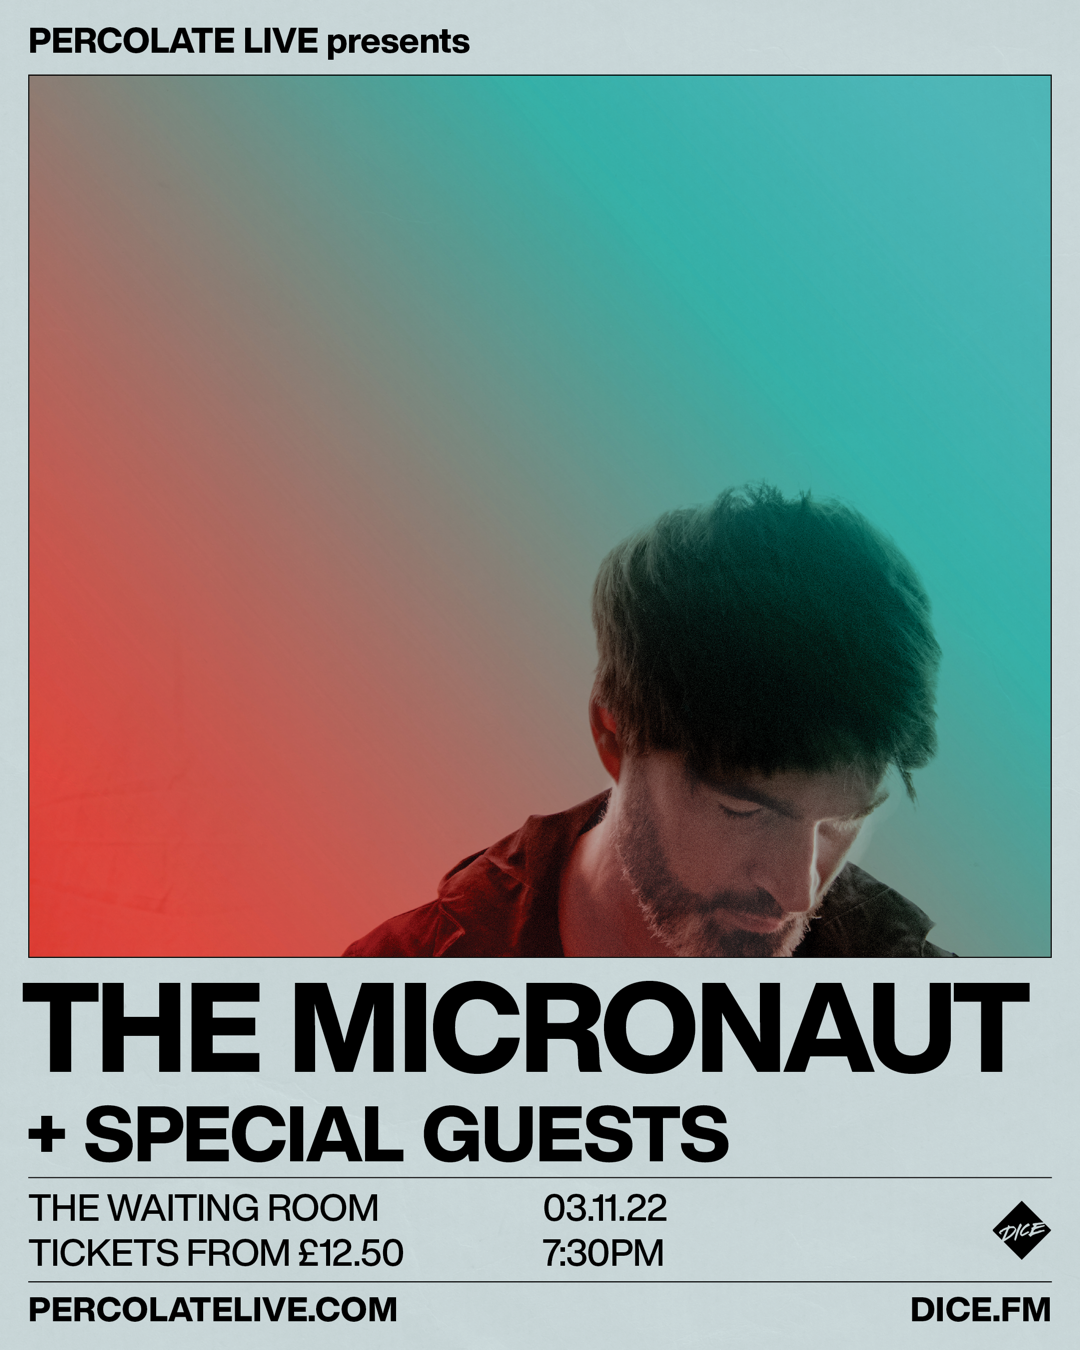 Percolate Live: The Micronaut - Flyer front